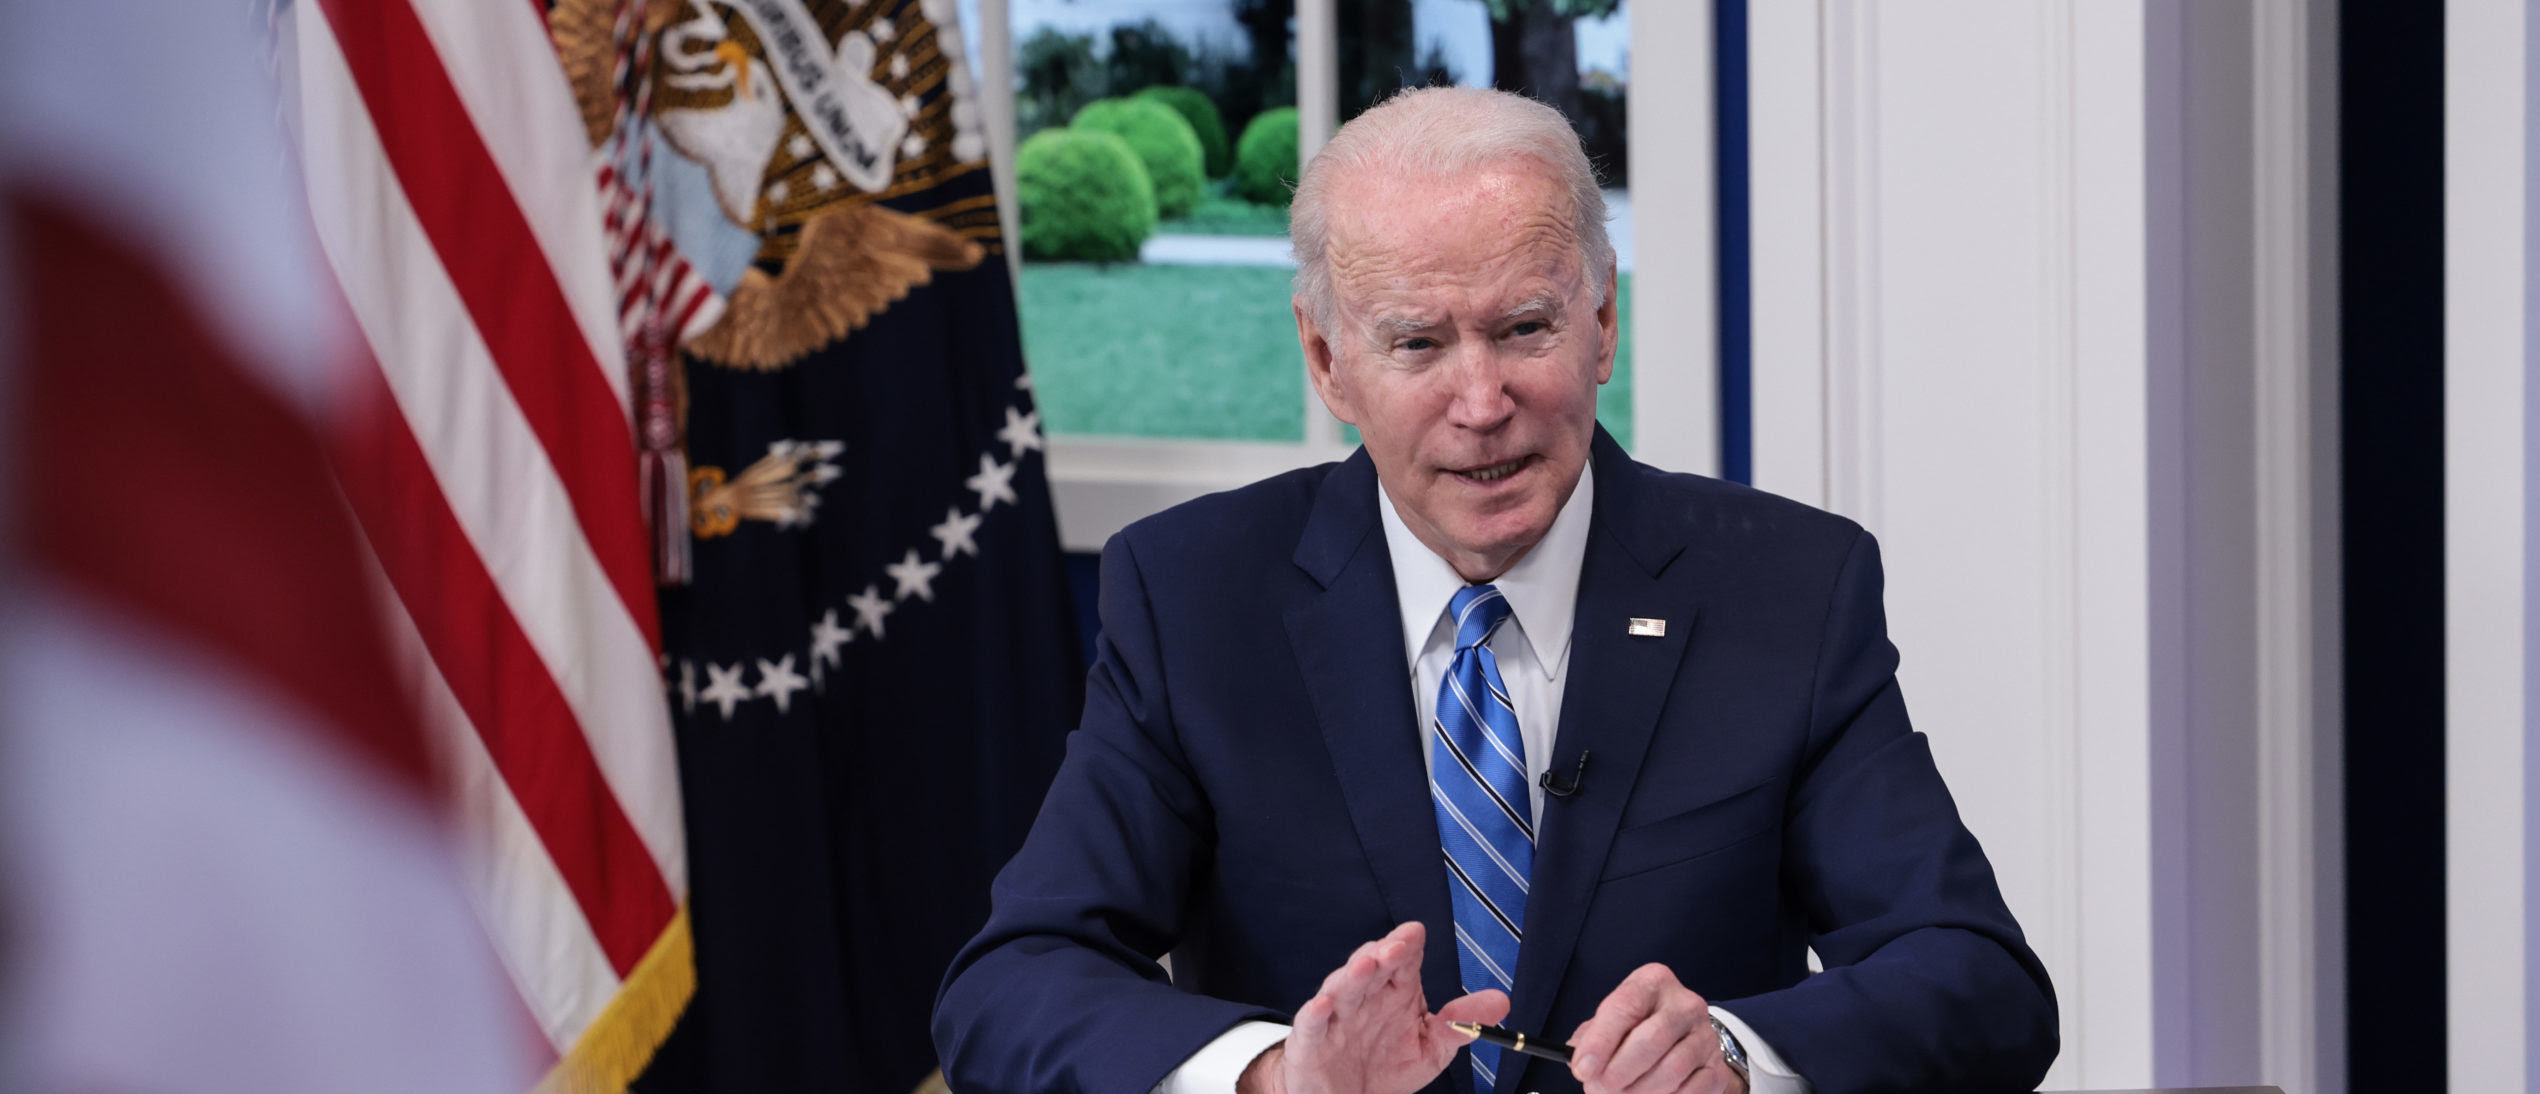 Biden Touts ‘Federal Plan’ For COVID After Saying There’s No ‘Federal Solution’